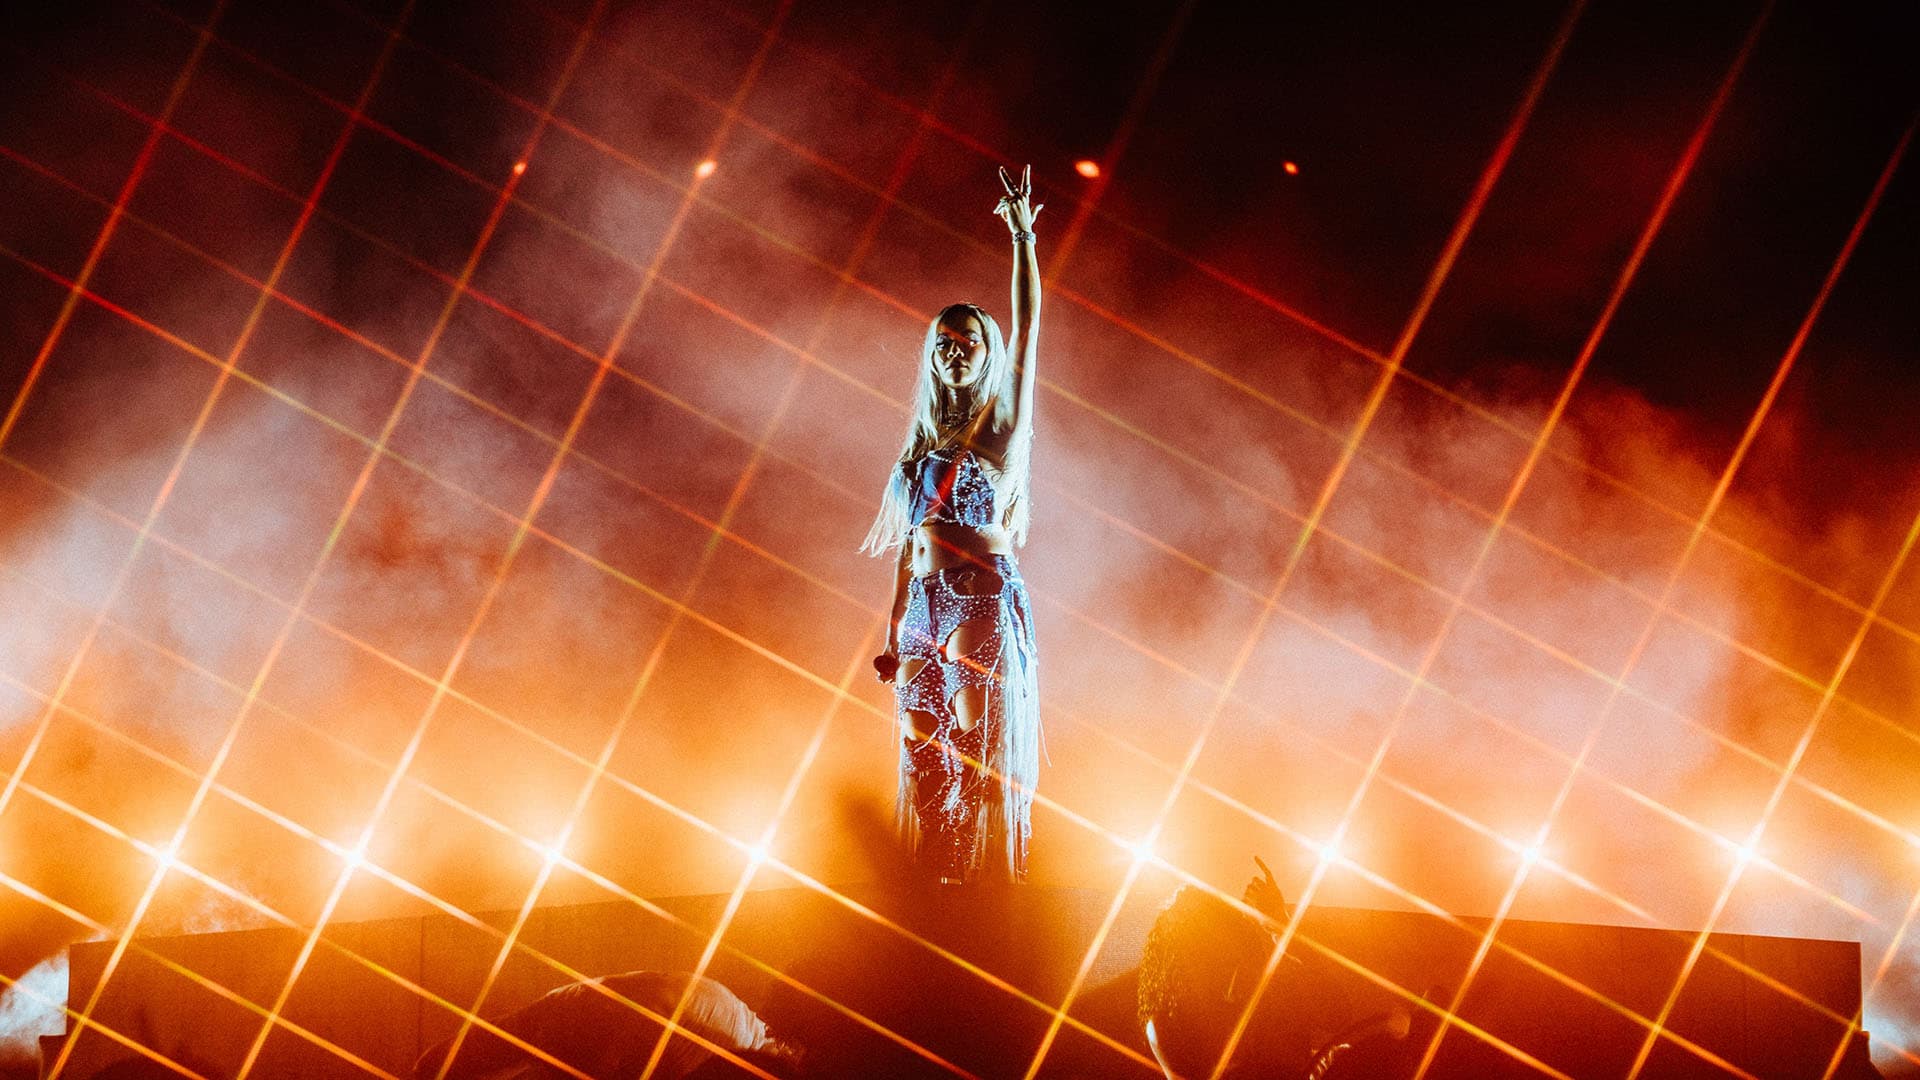 Rita Ora stands with one arm in the air on a stage with bright orange, grid-like lights